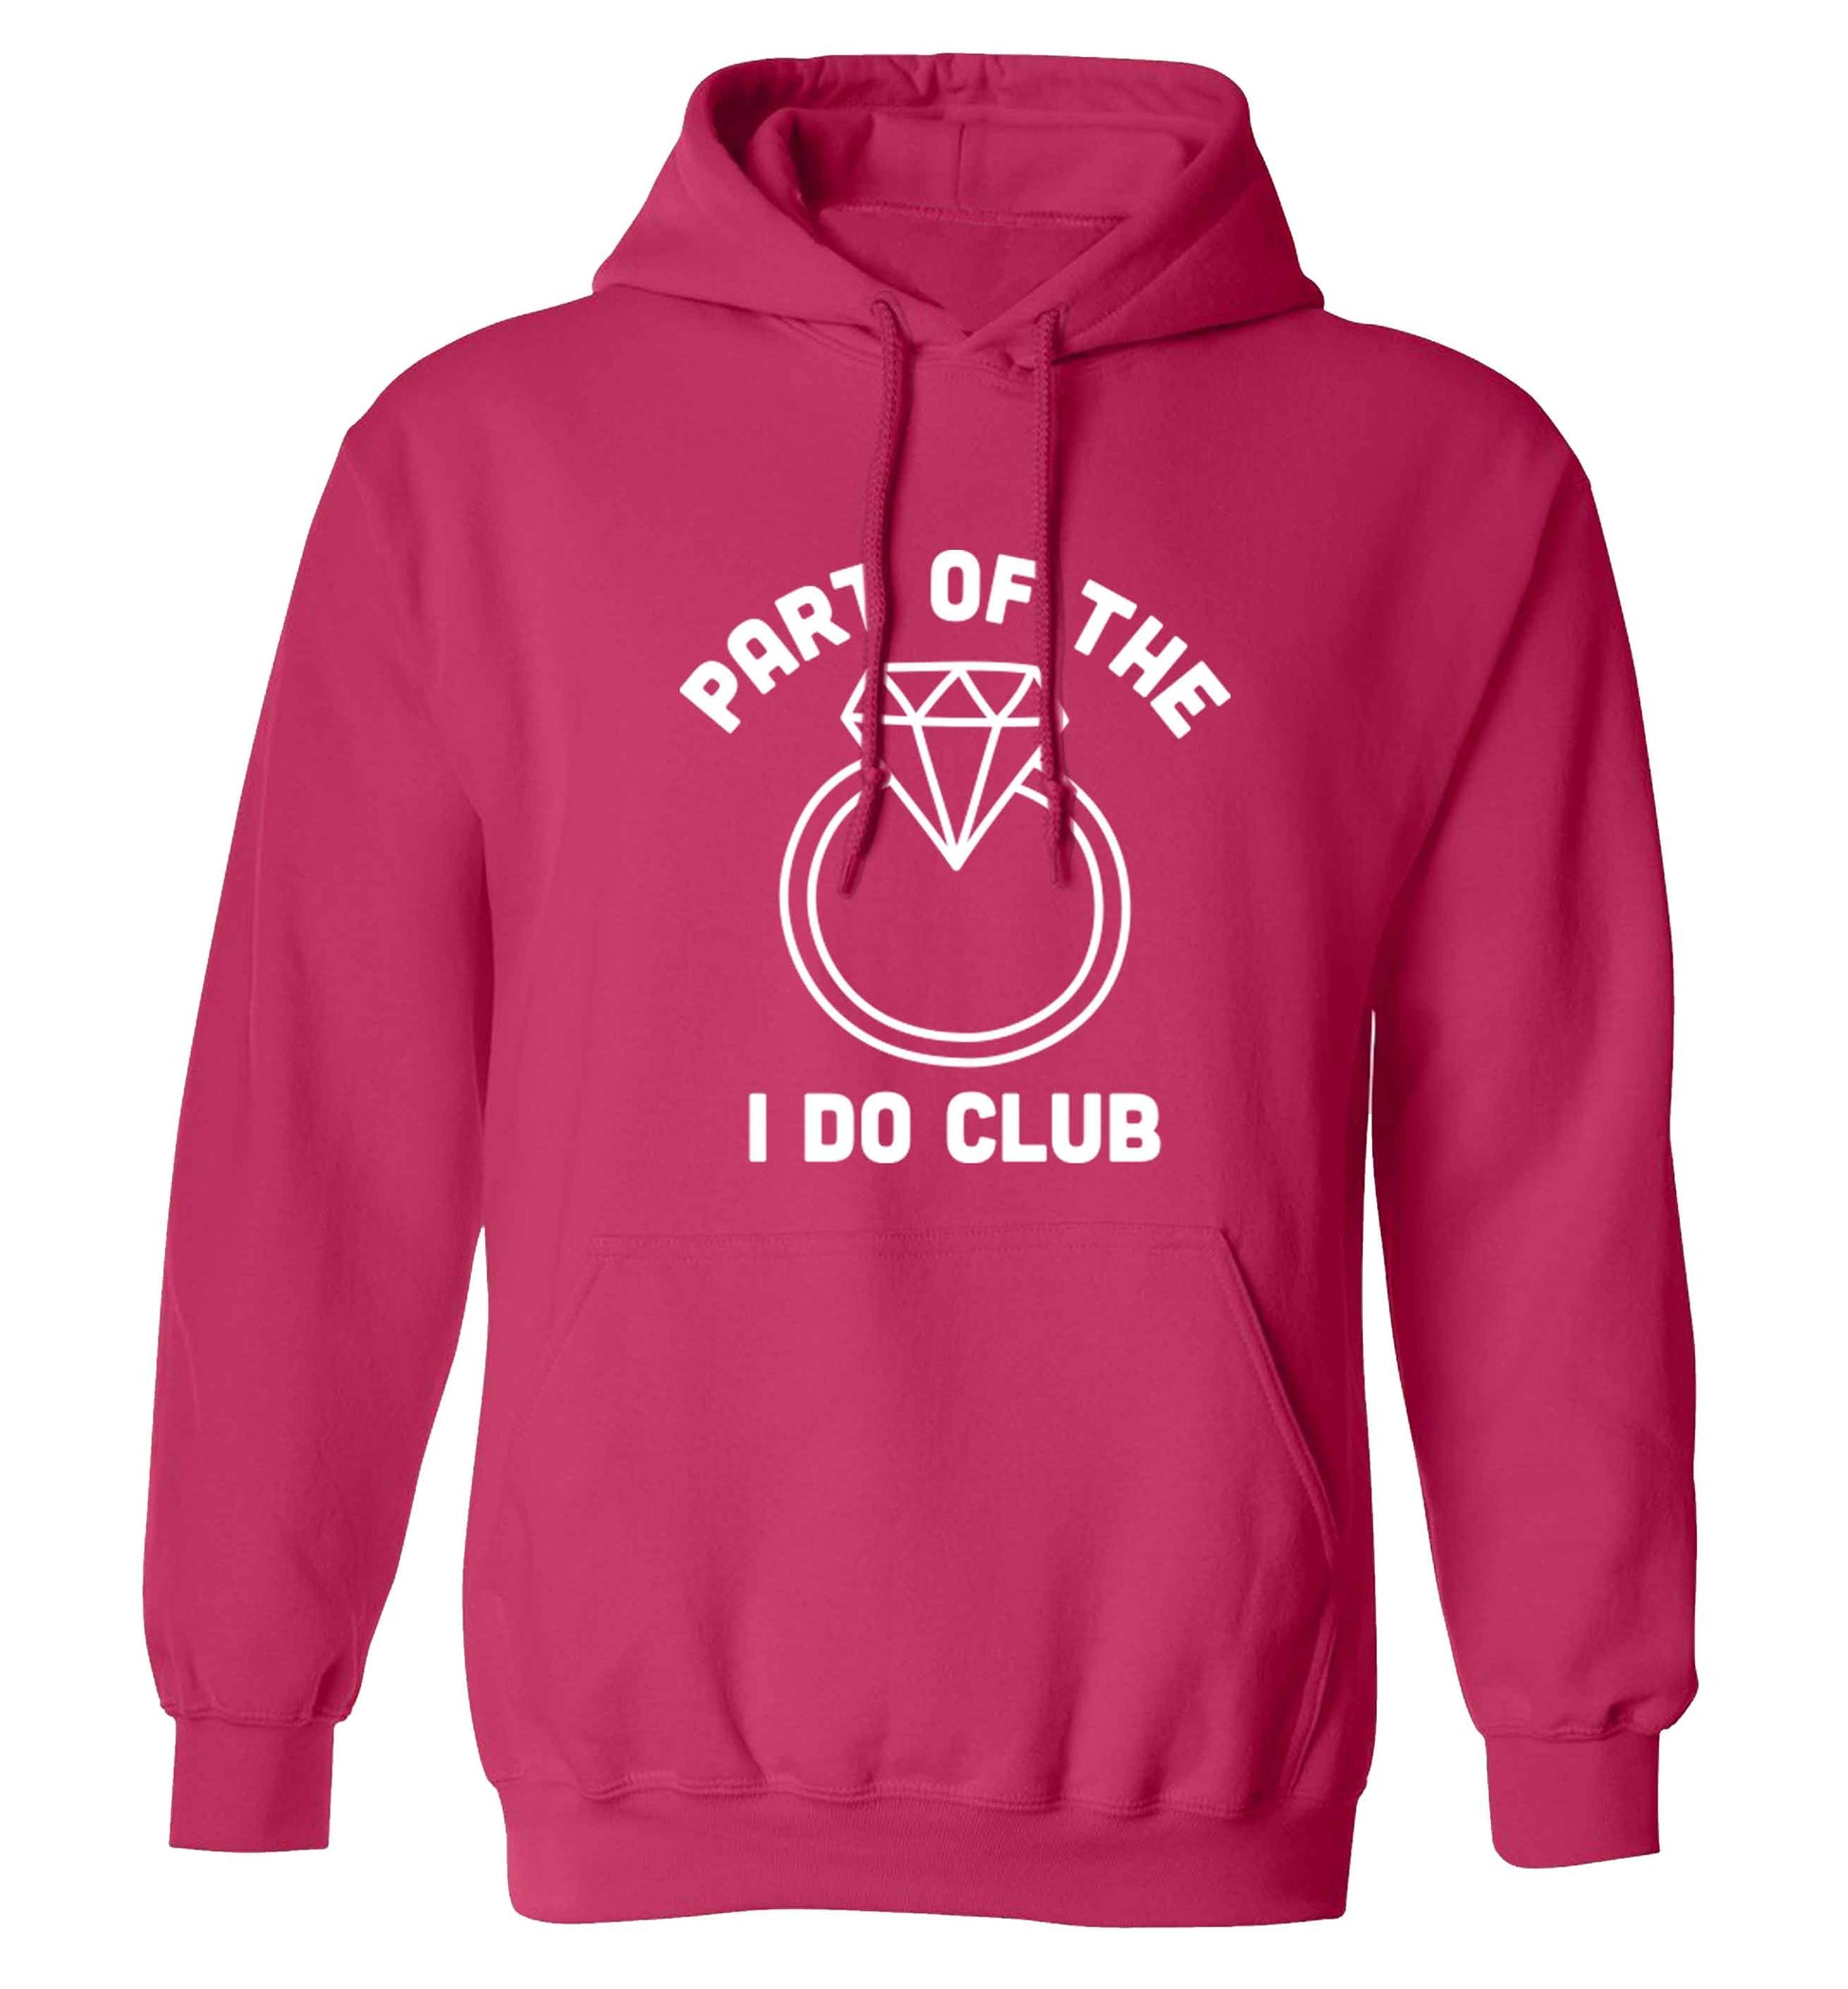 Part of the I do club adults unisex pink hoodie 2XL